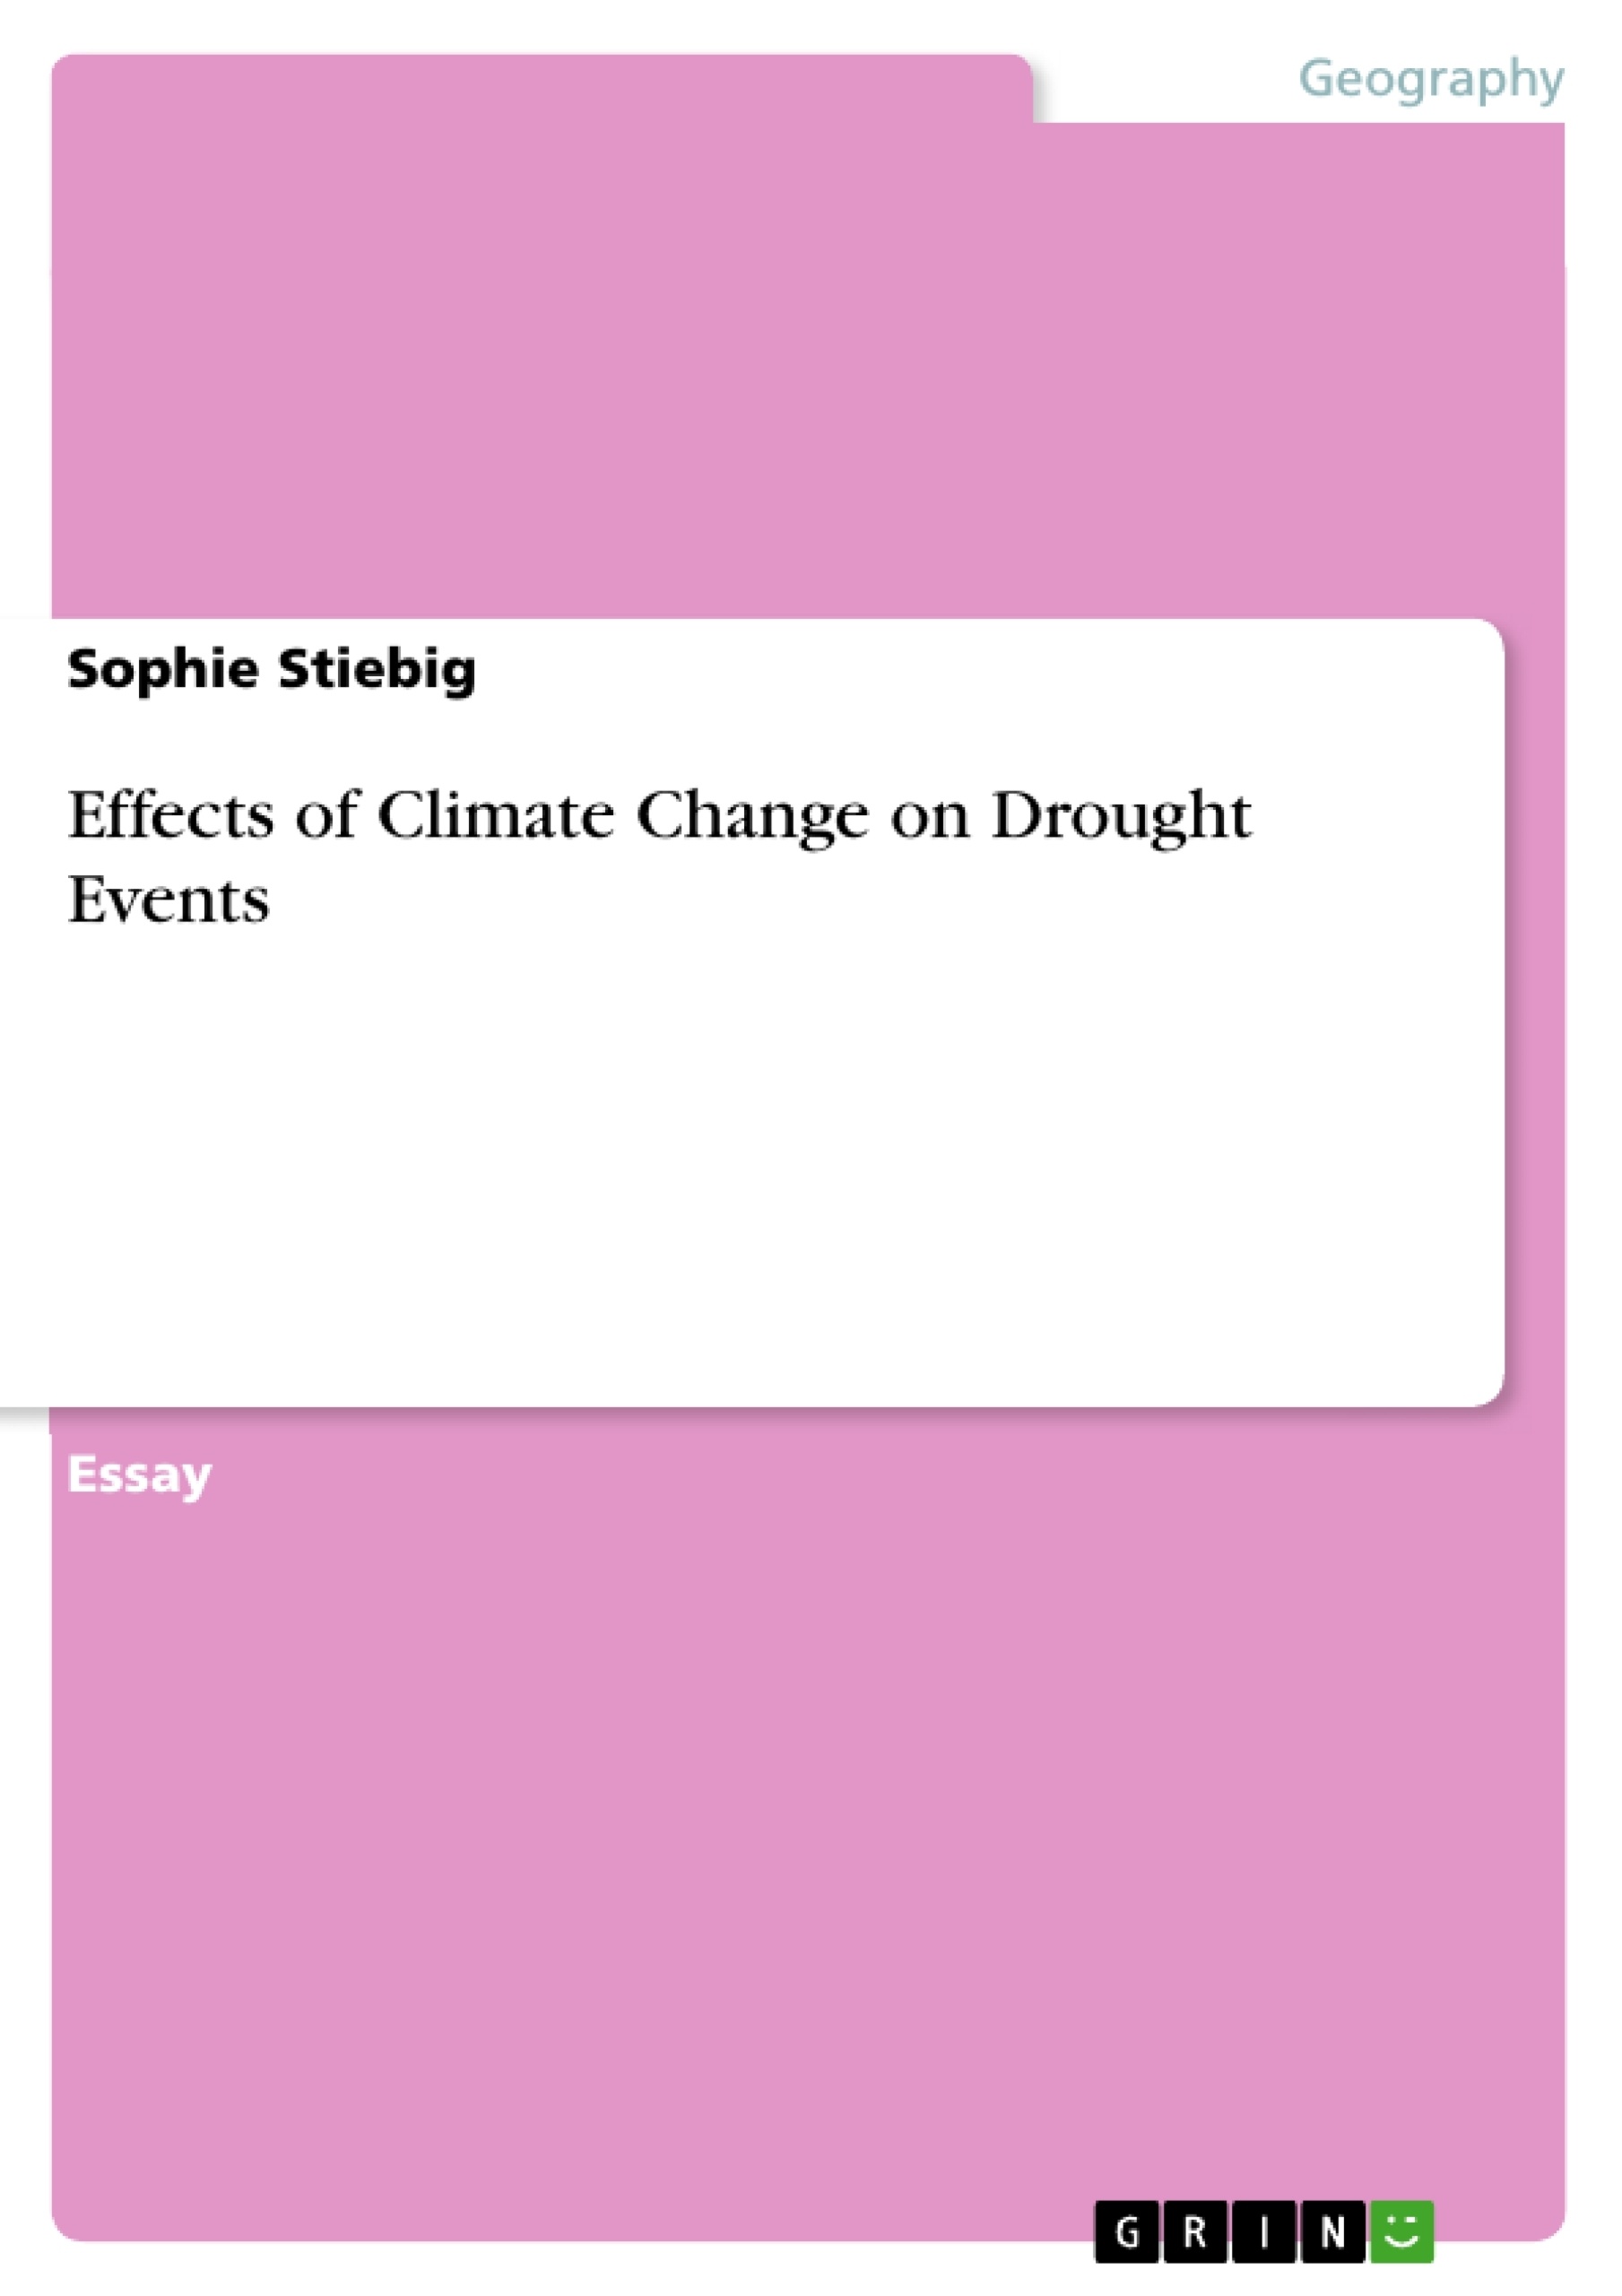 Title: Effects of Climate Change on Drought Events